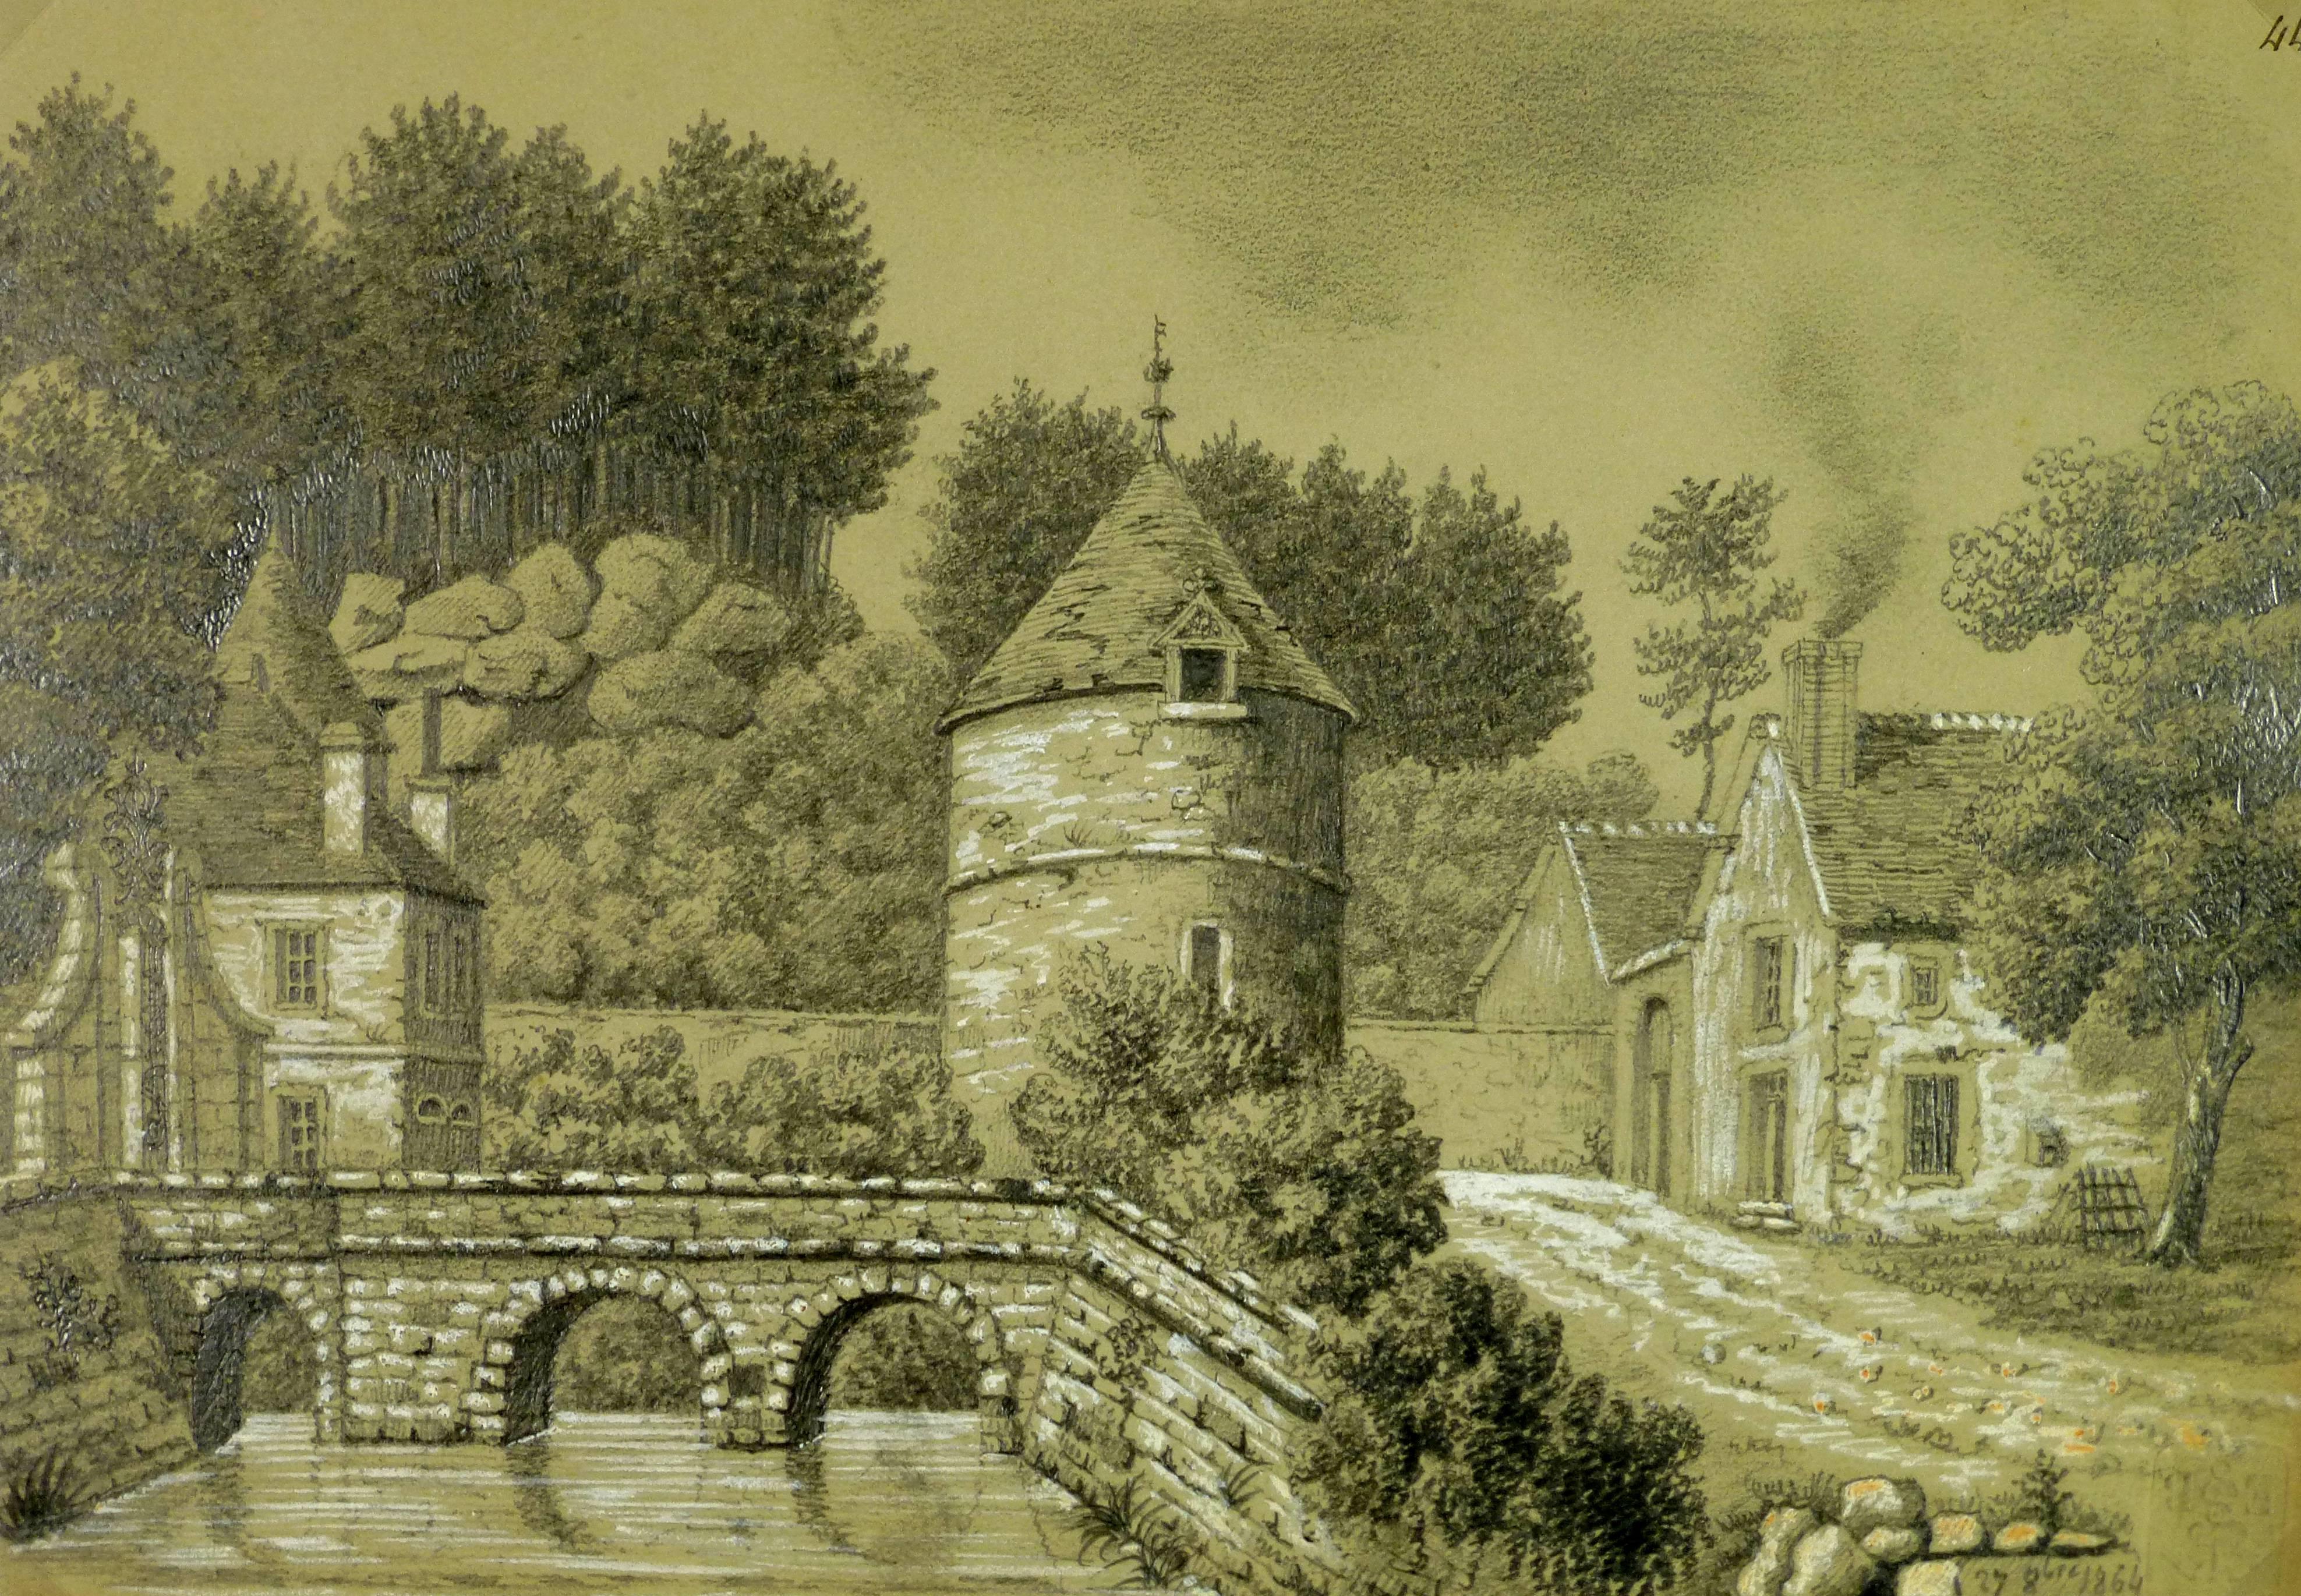 Unknown Landscape Art - 19th Century Drawing